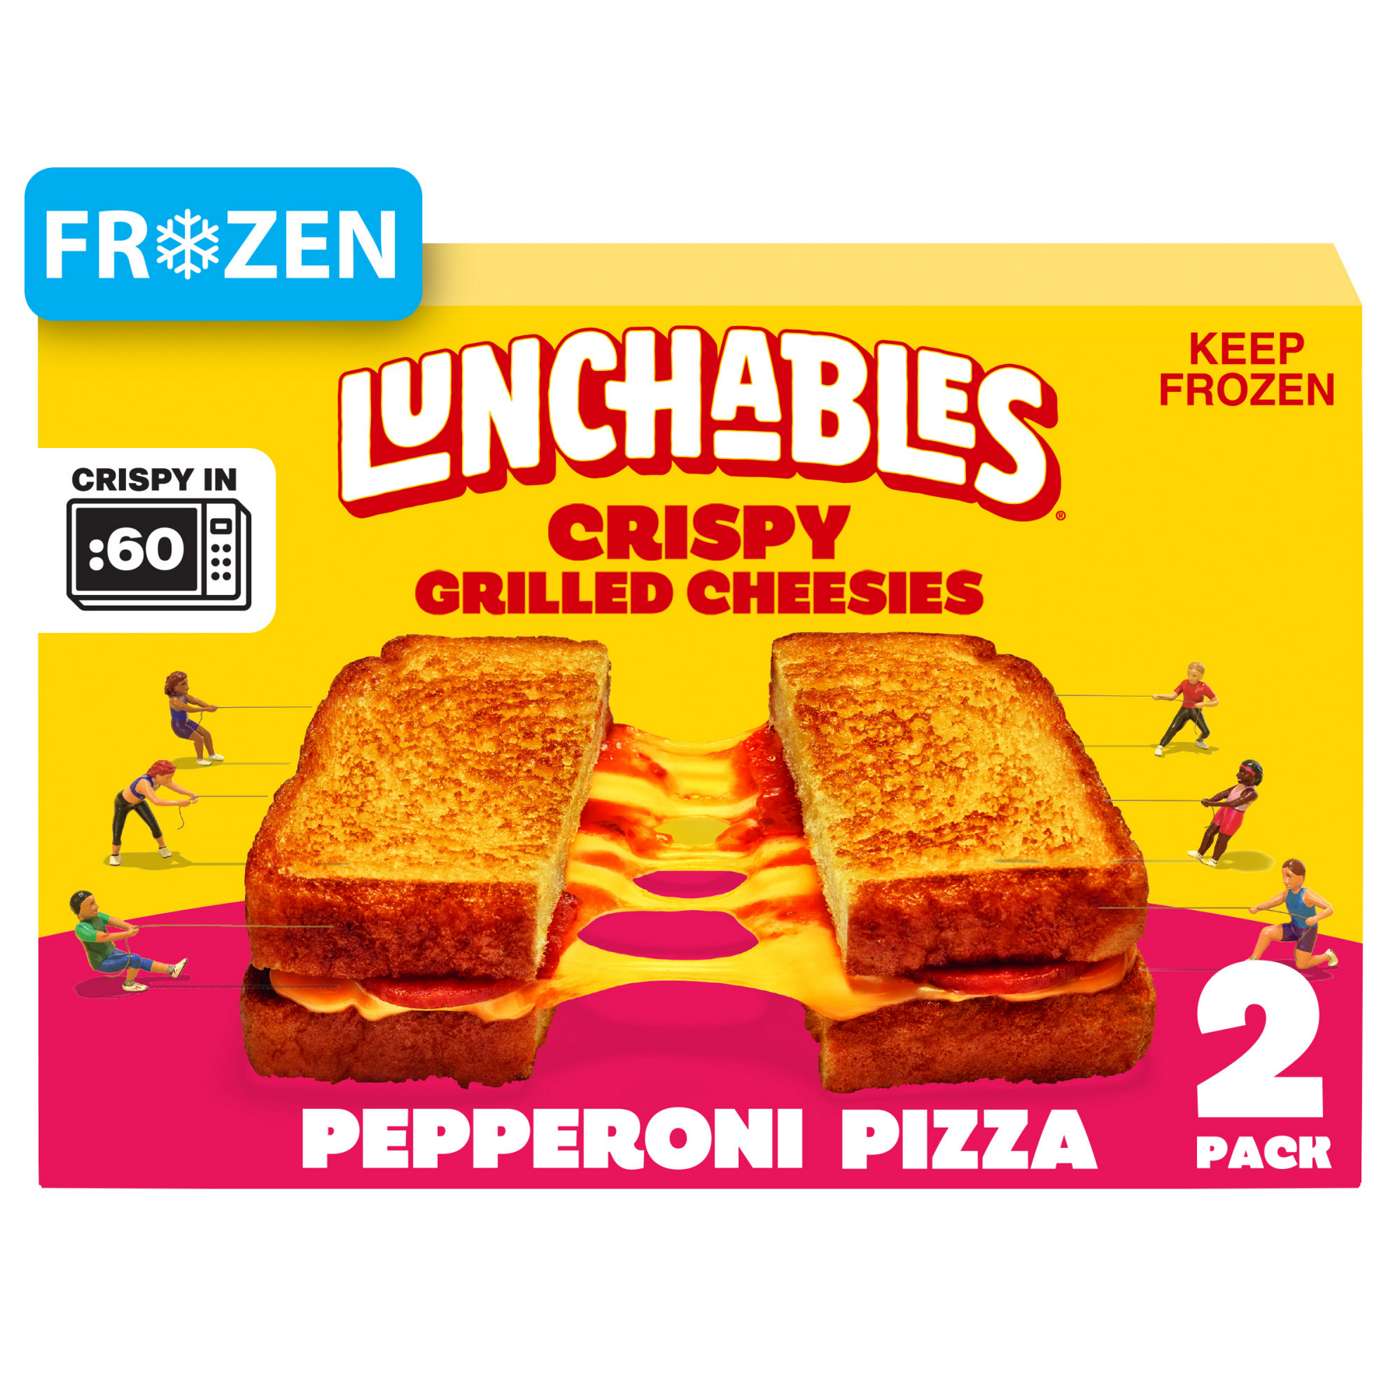 Lunchables Crispy Grilled Cheesies Frozen Sandwiches - Pepperoni Pizza; image 1 of 4